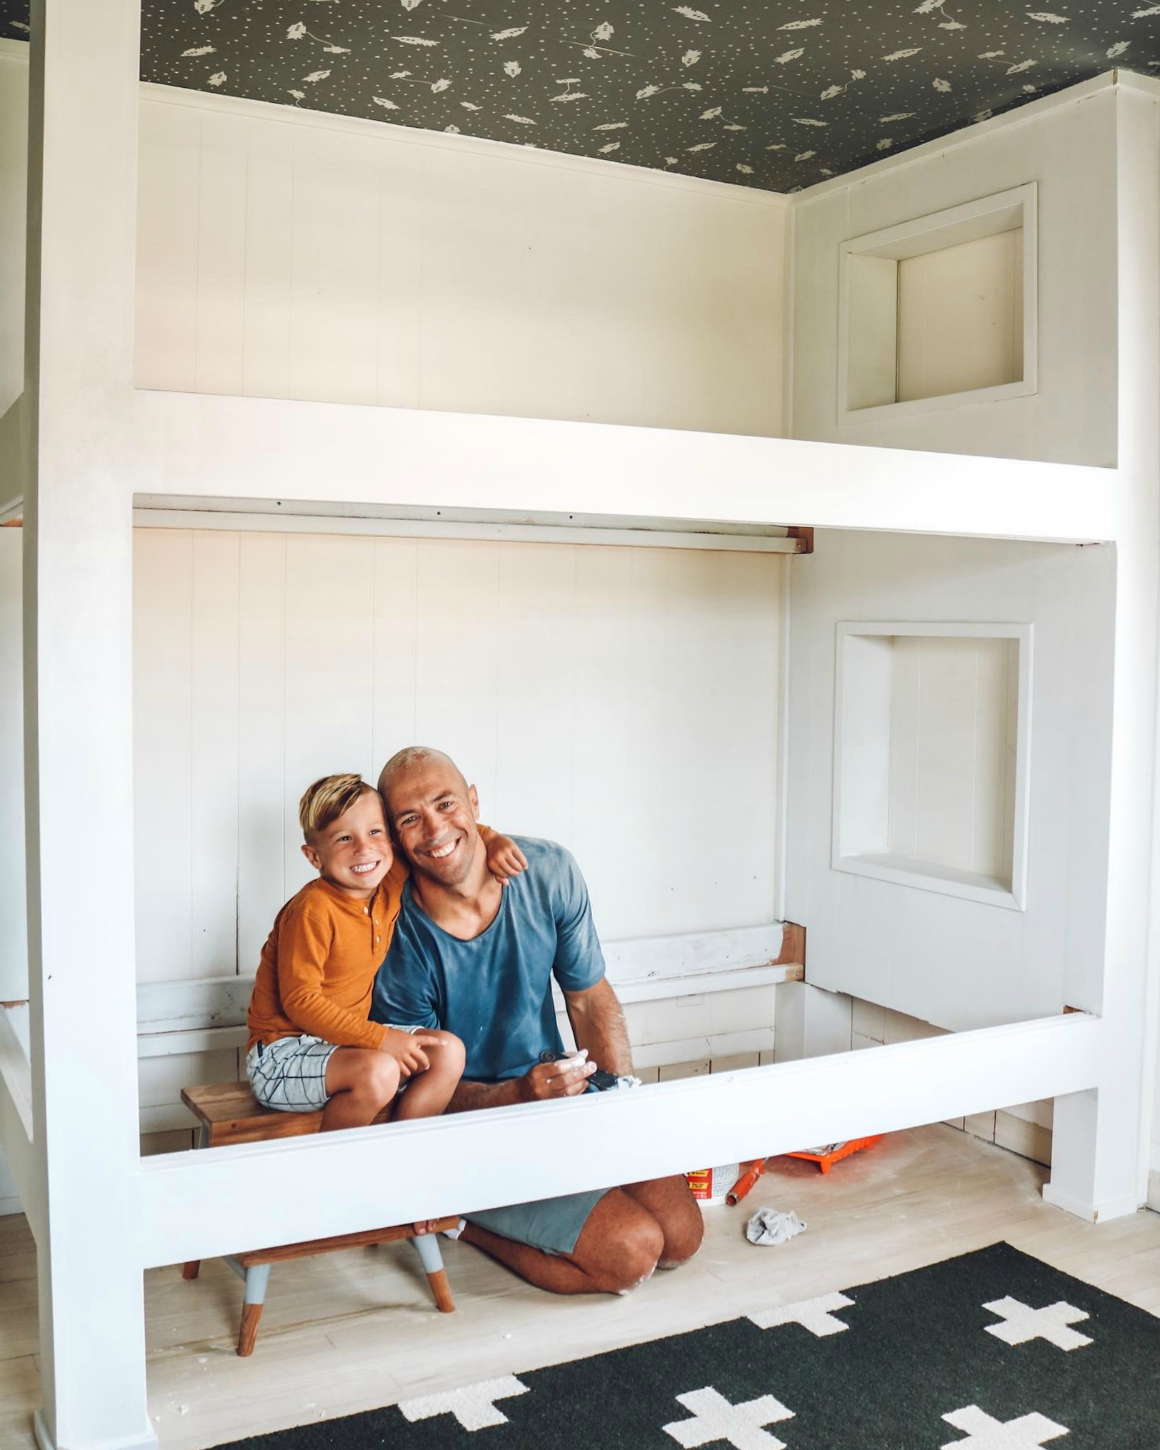 Built In Bunkbed Diy For 500 Nesting, Diy Bunk Beds For Small Rooms